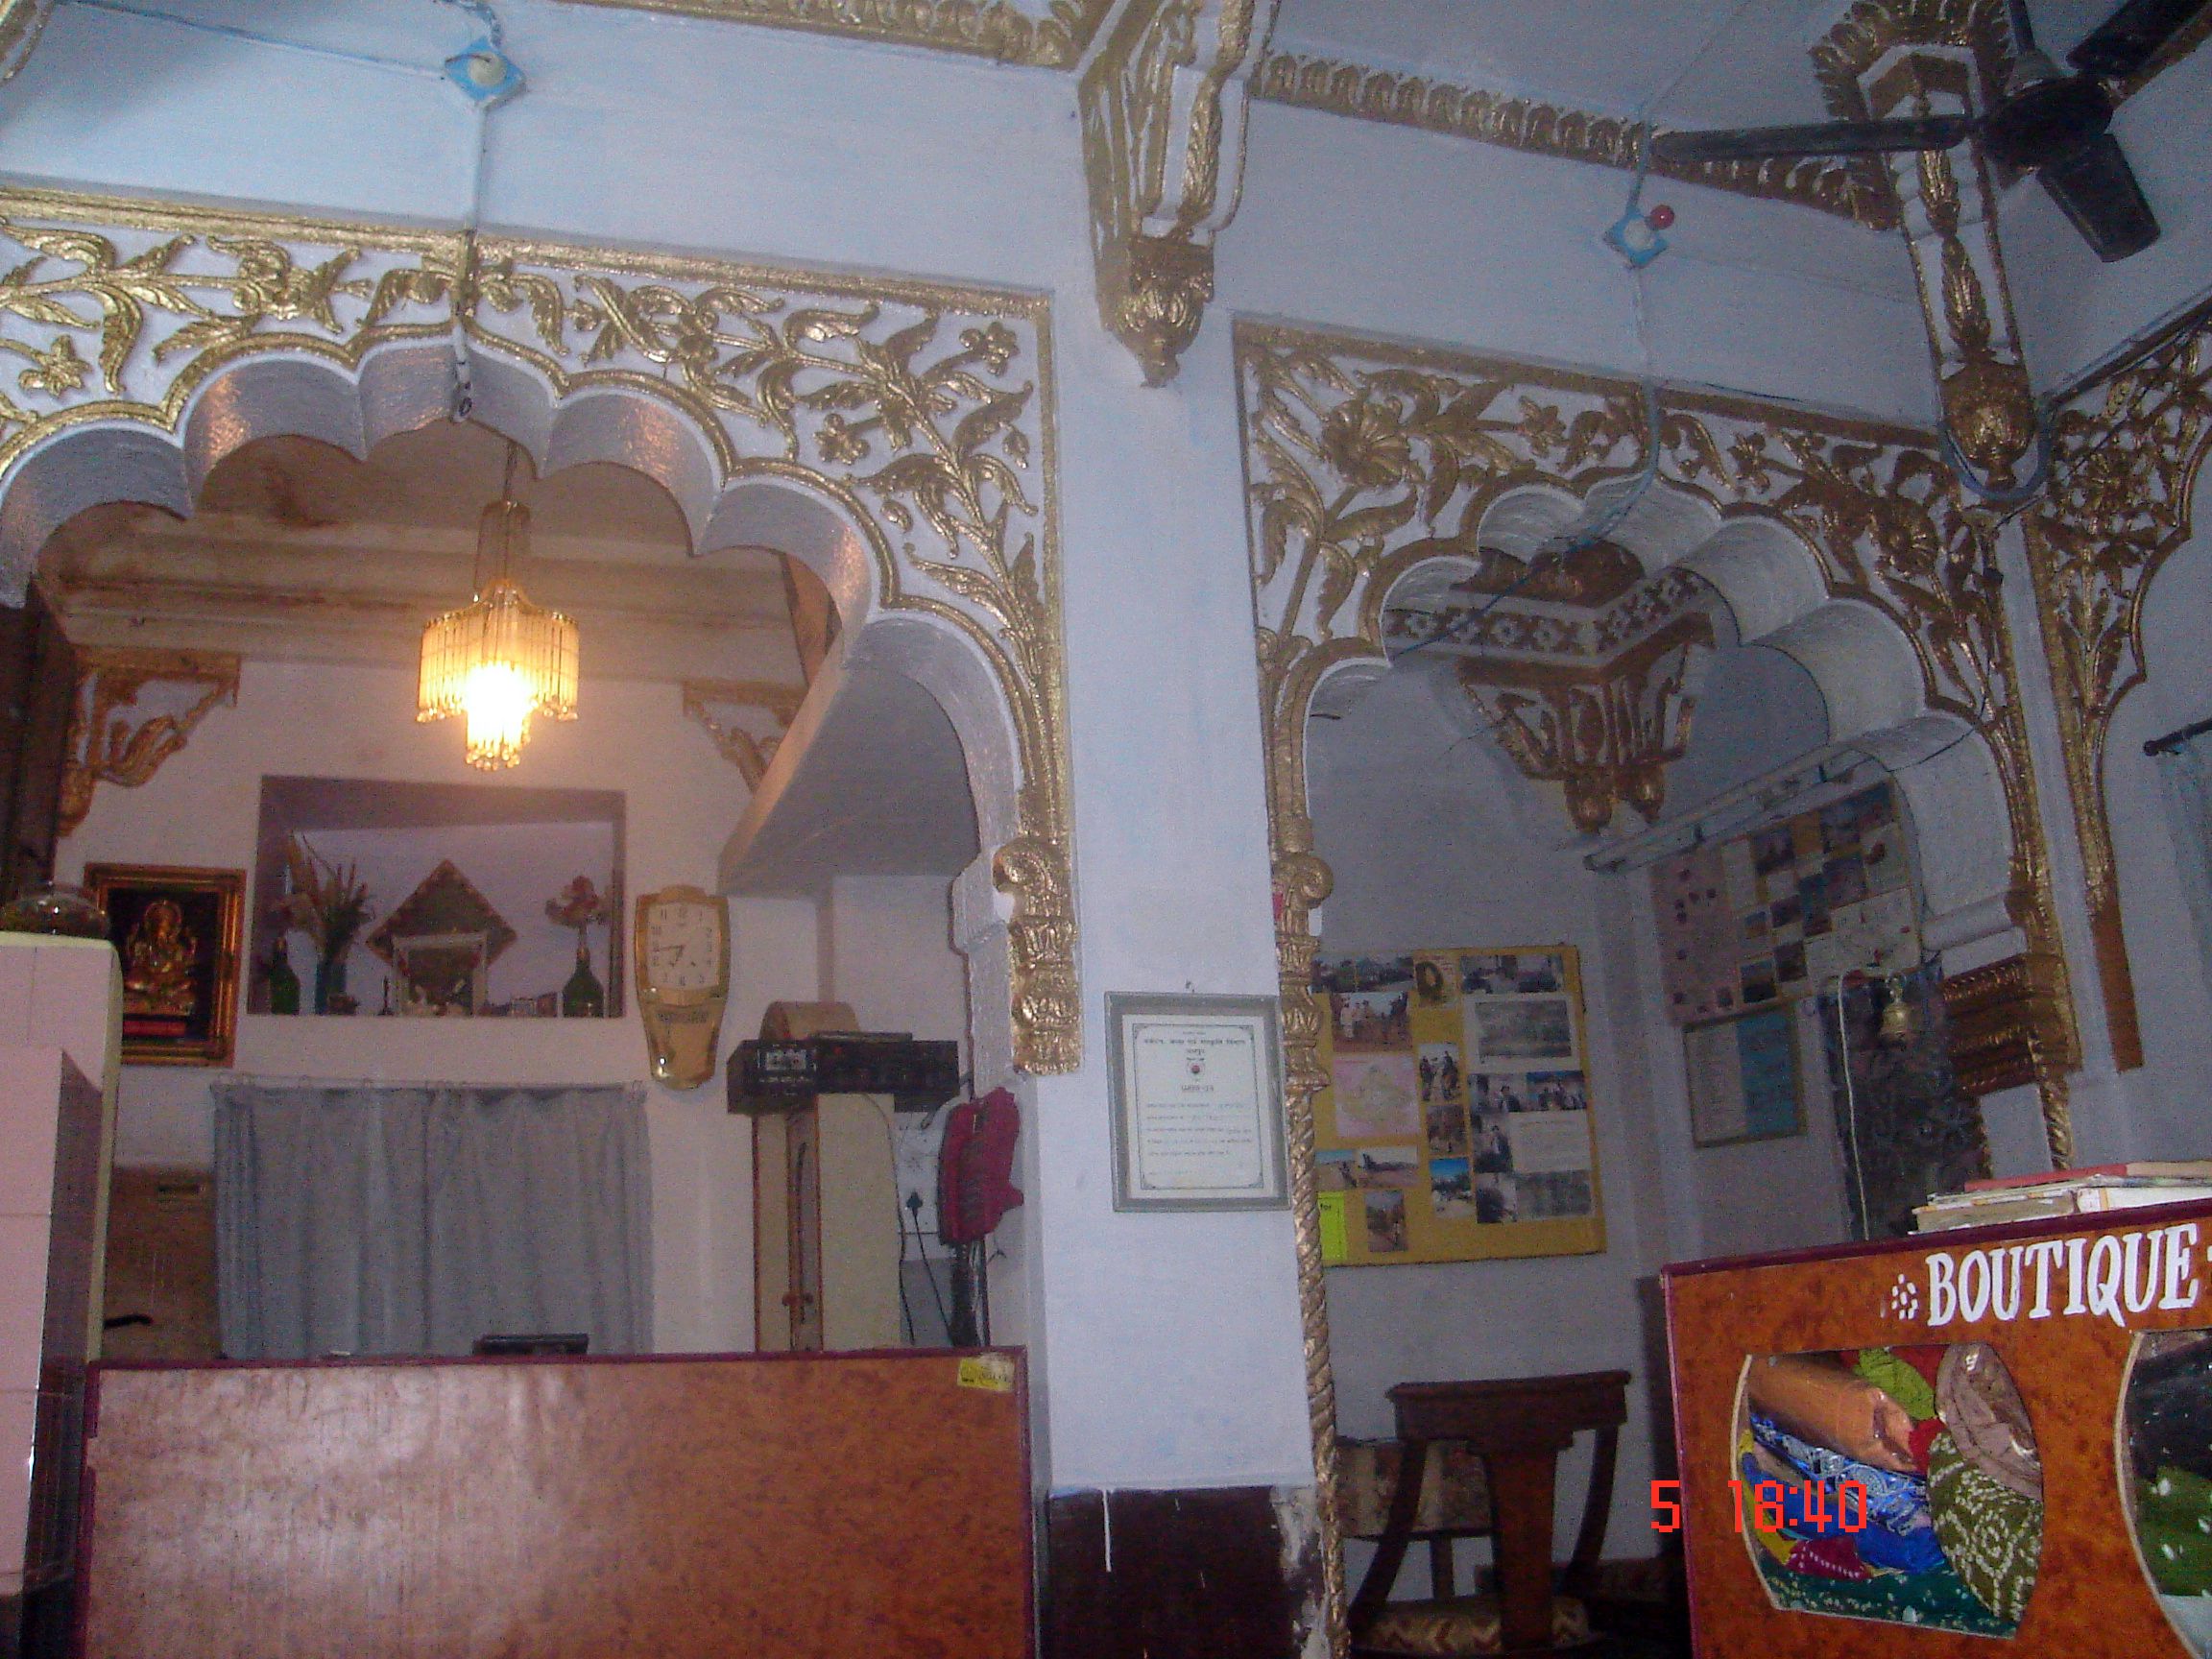 Interior view of the guesthouse